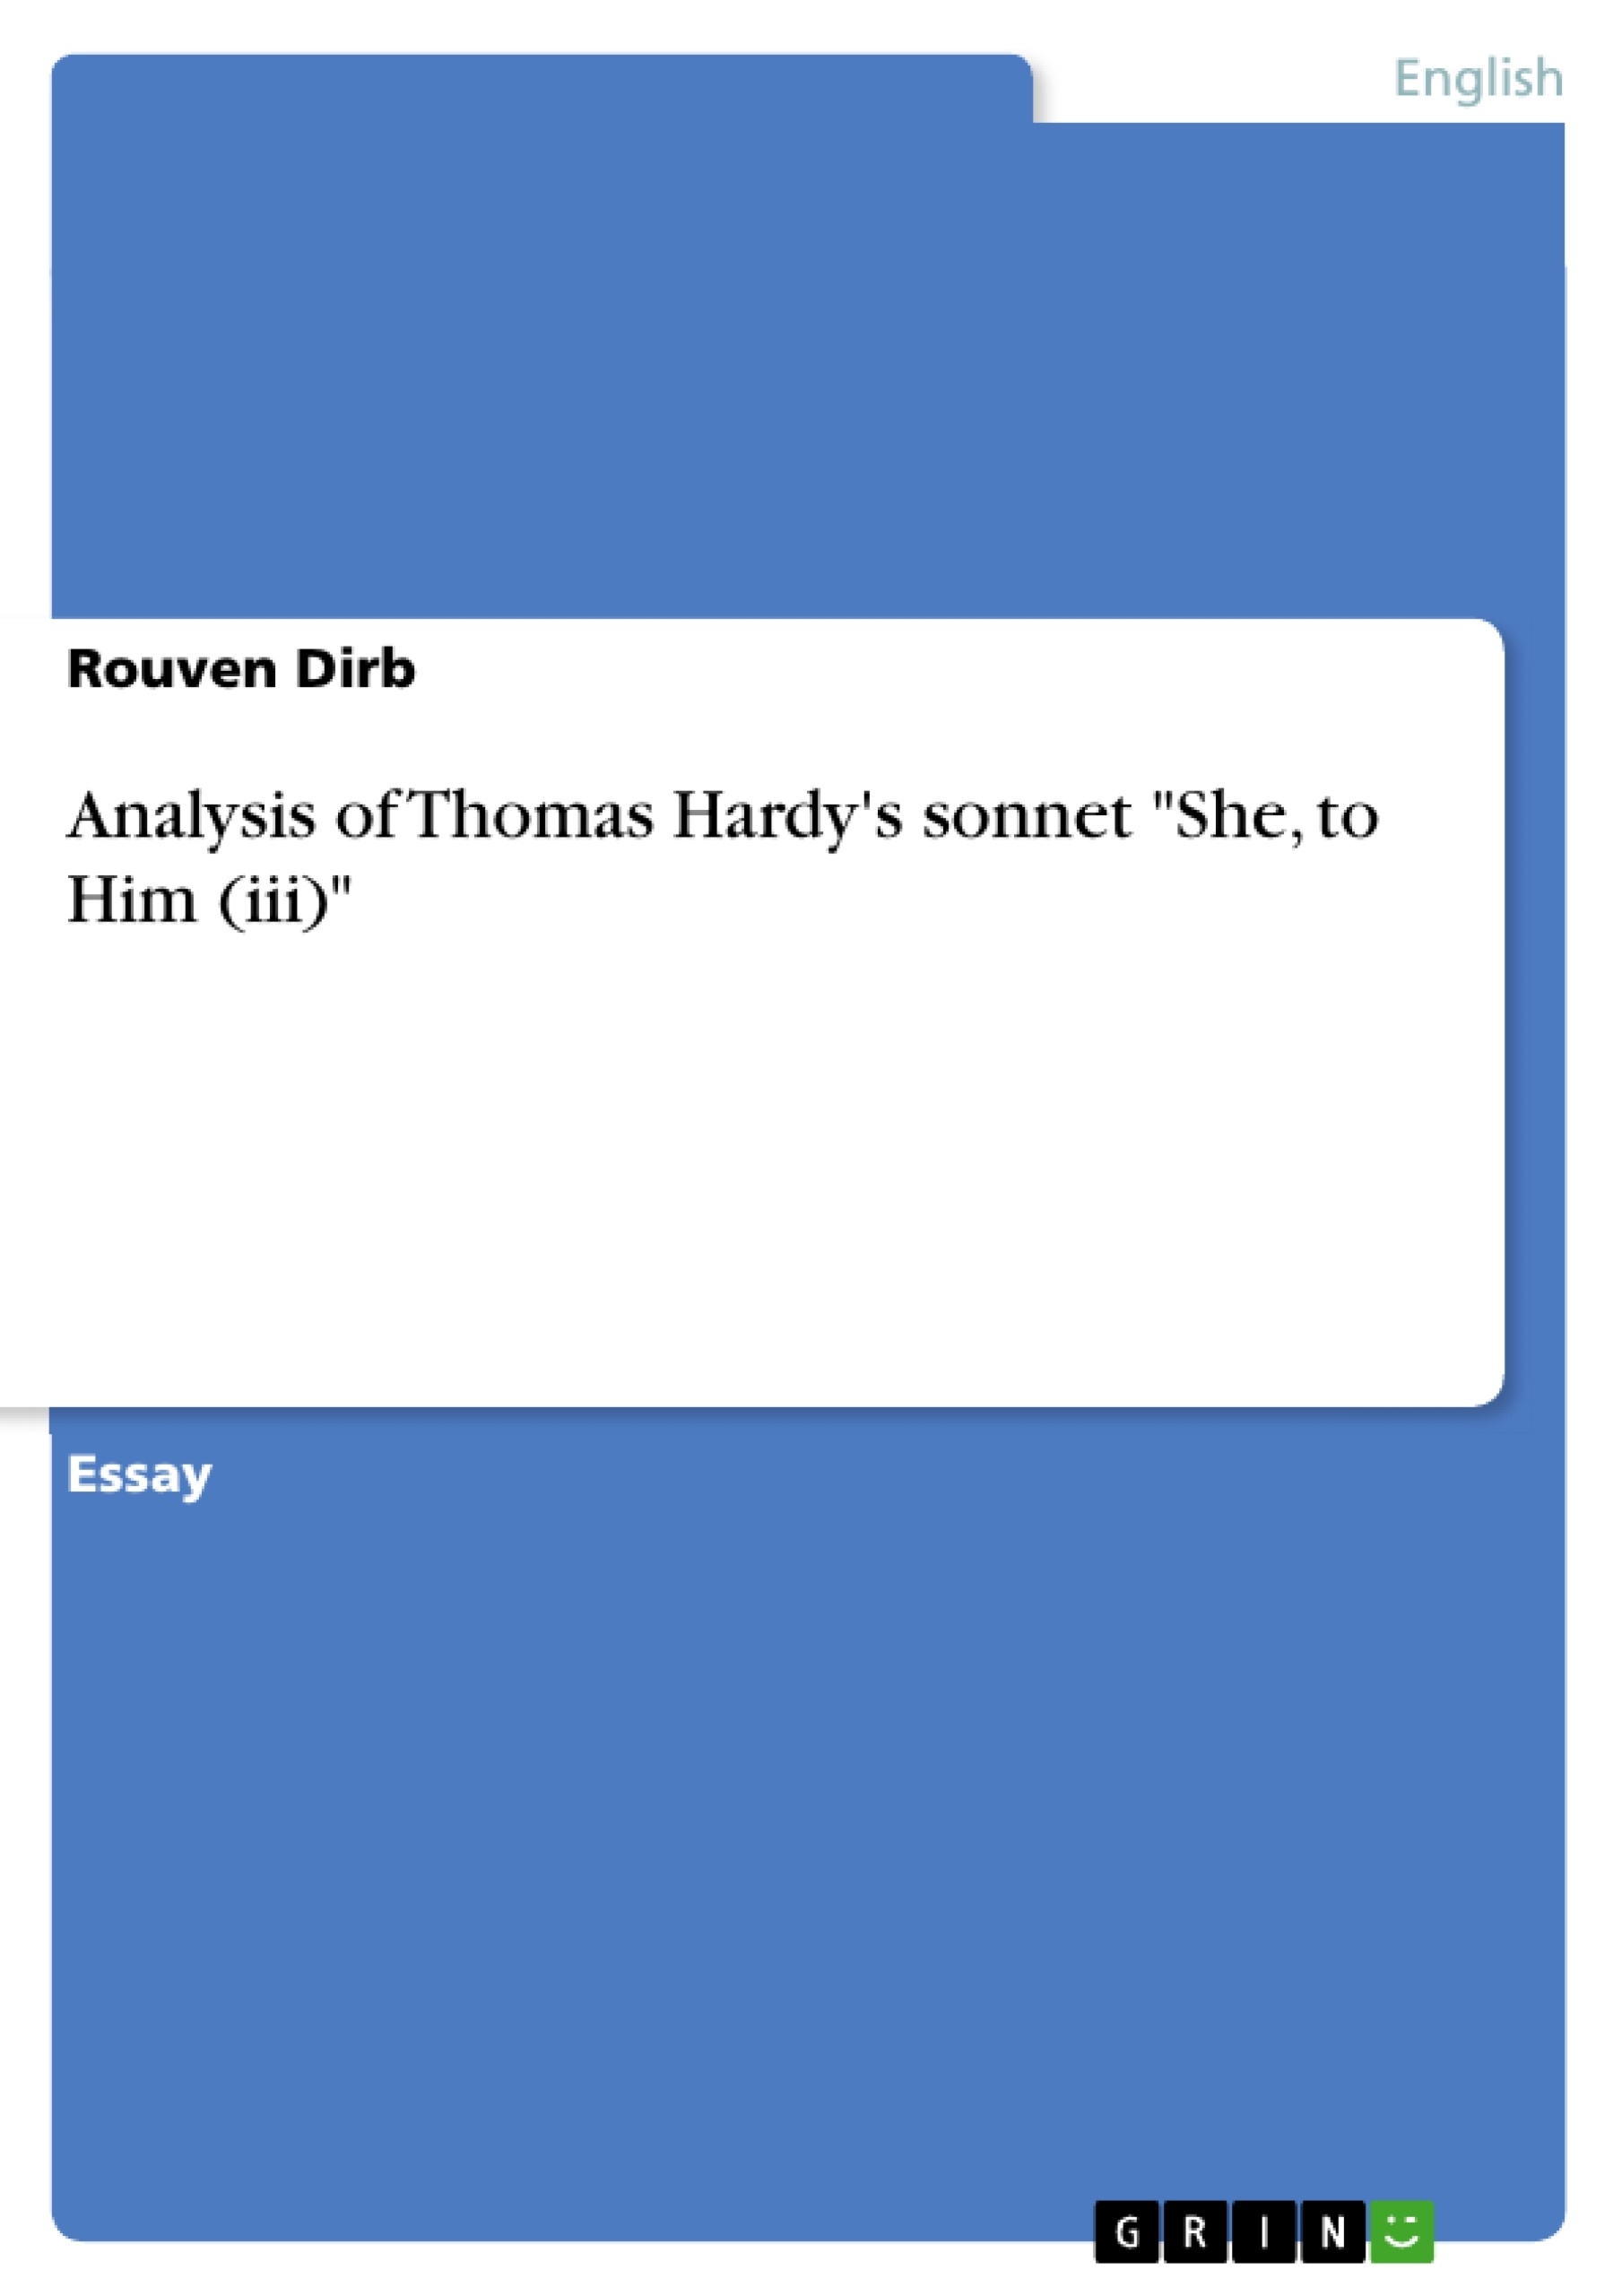 Title: Analysis of Thomas Hardy's sonnet "She, to Him (iii)"